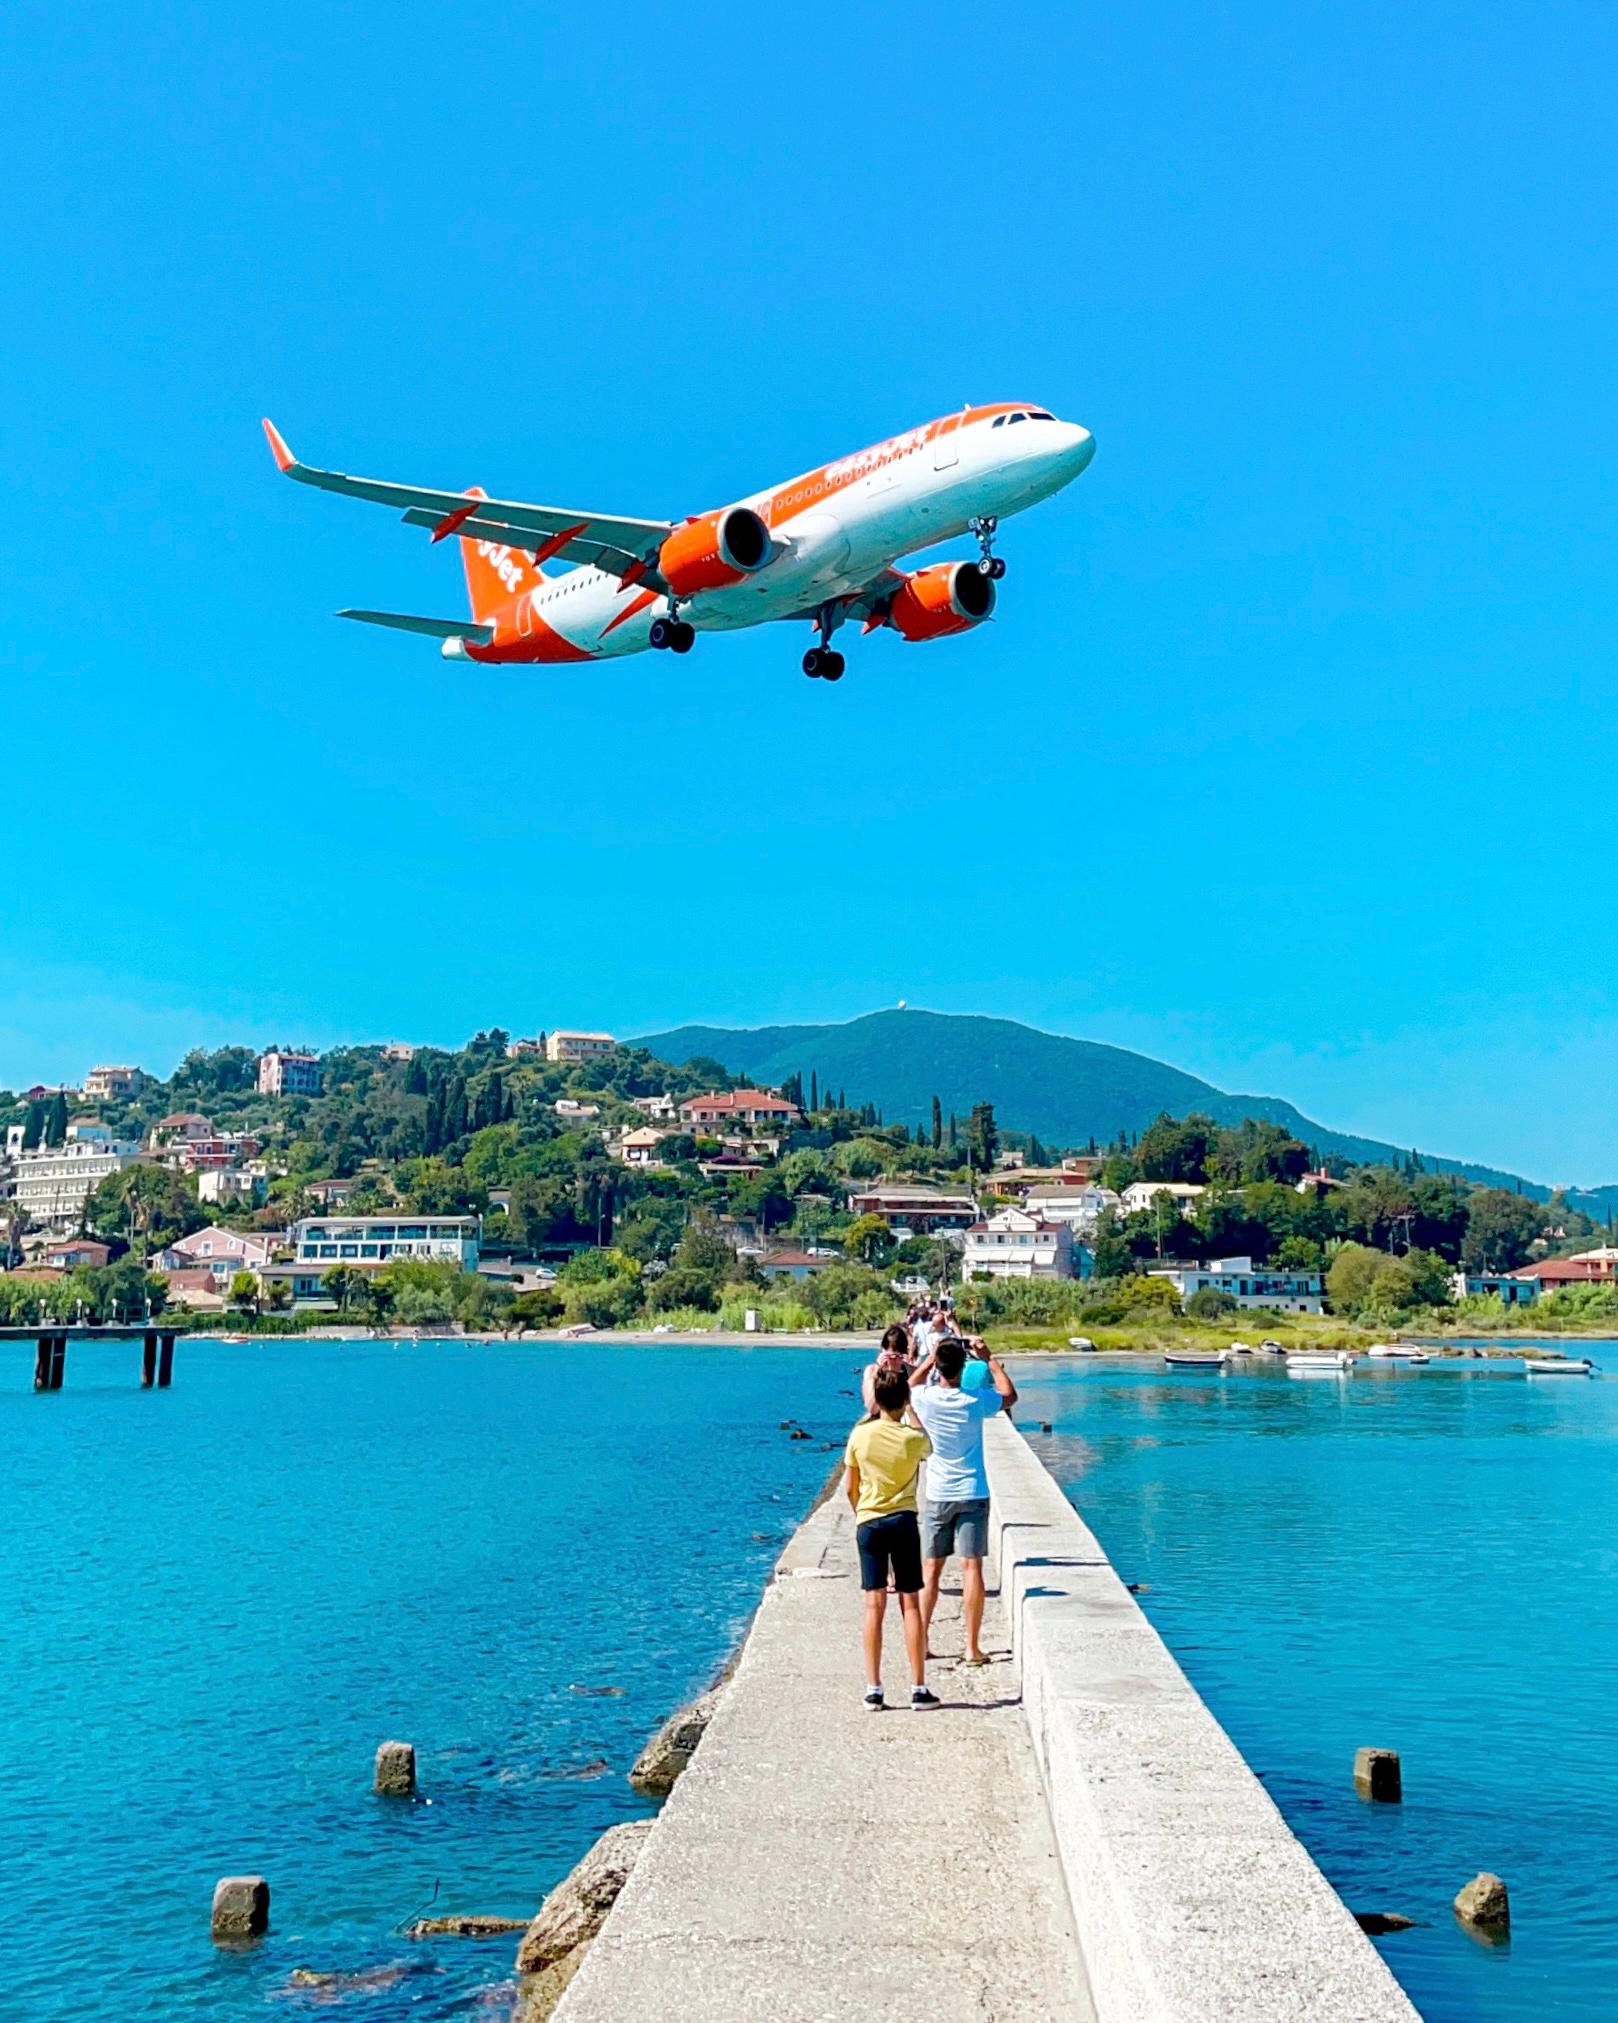 Up To 40% Off on Last Minute Holidays at easyJet